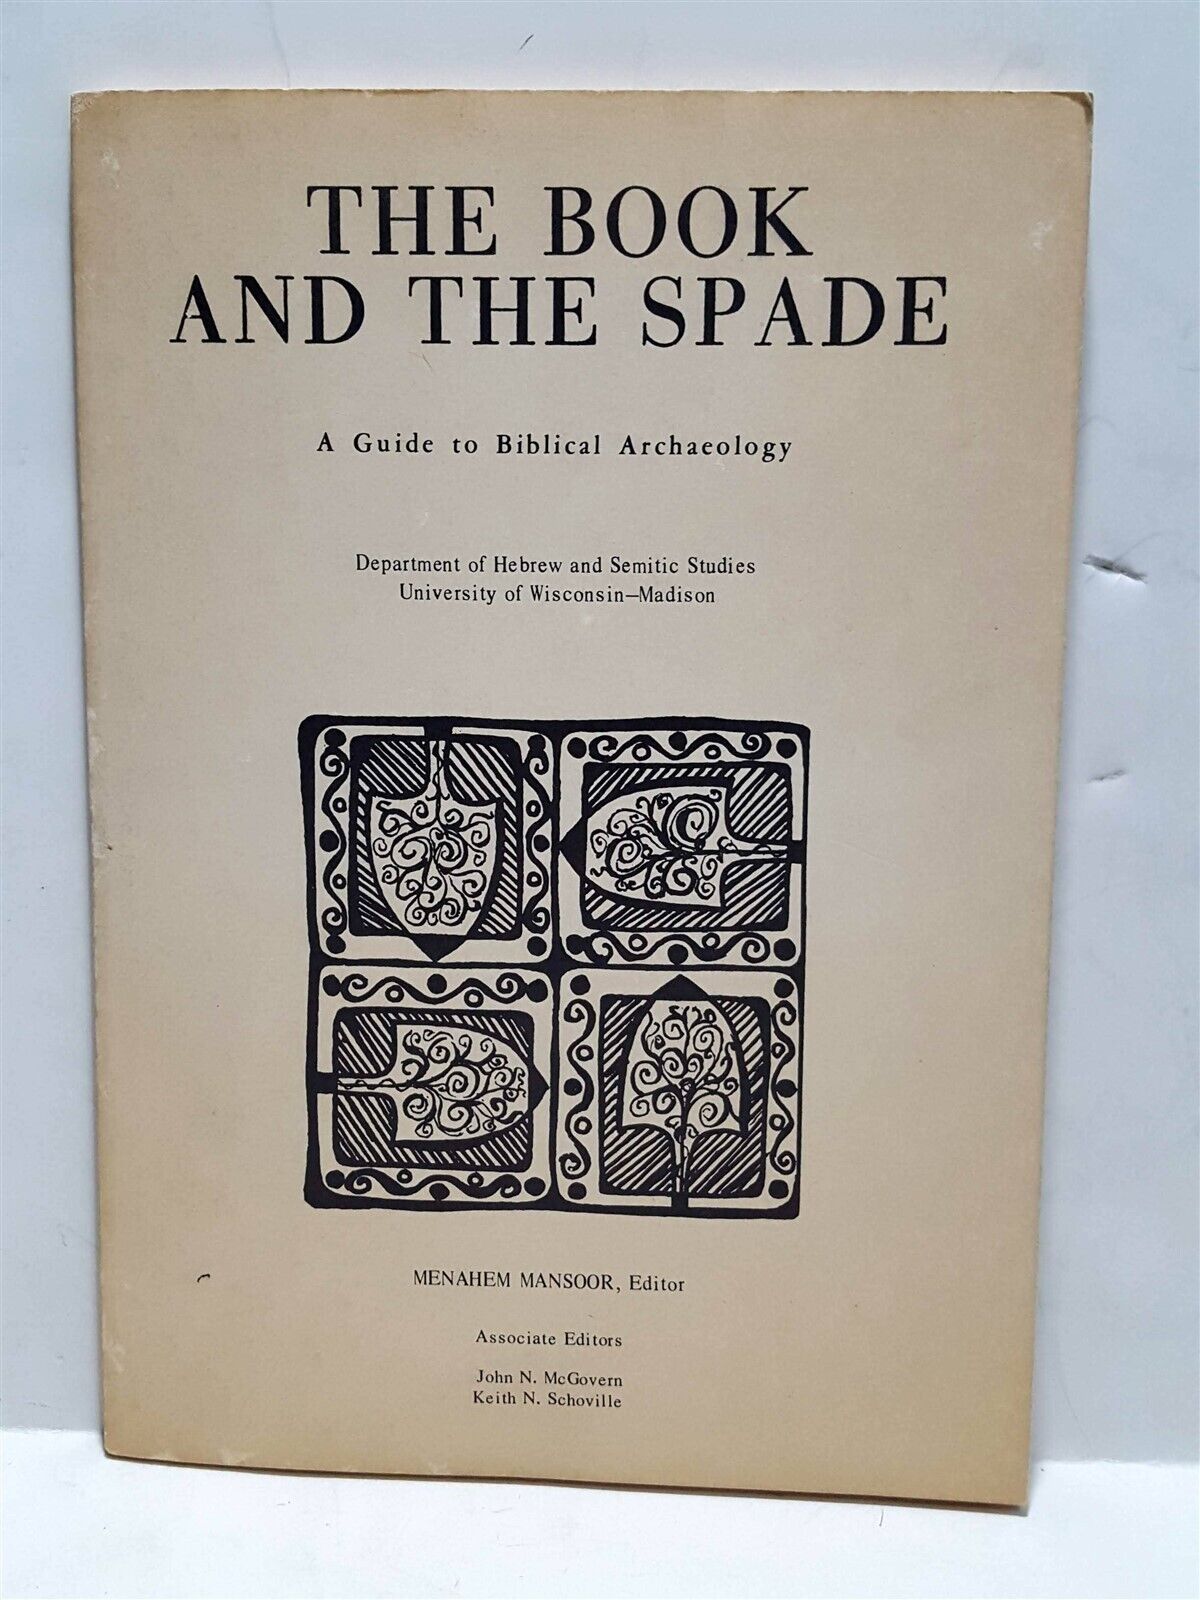 The Book and the Spade A Guide to Biblical Archaeology Menahem Mansoor Editor